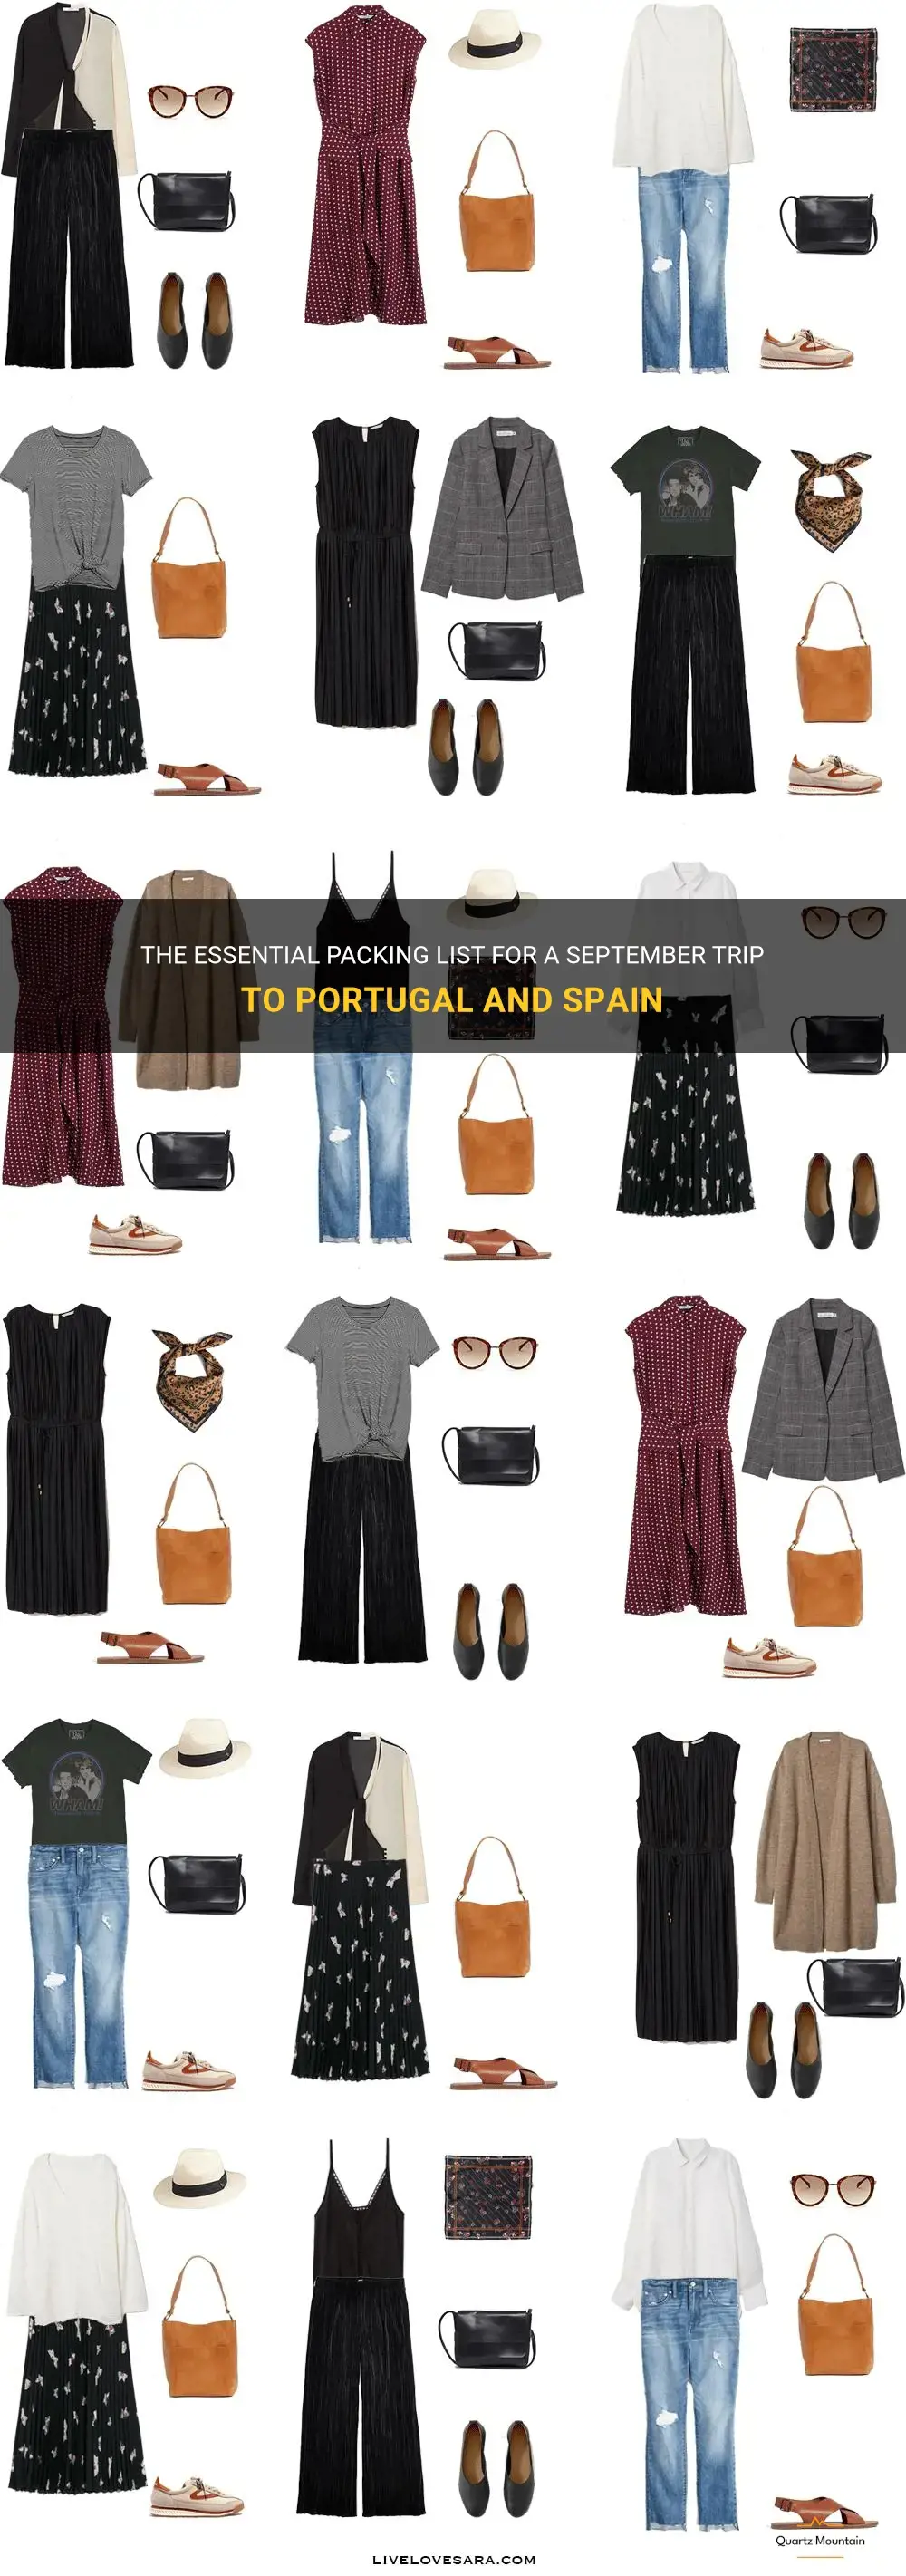 what to pack for portugal and spain in September